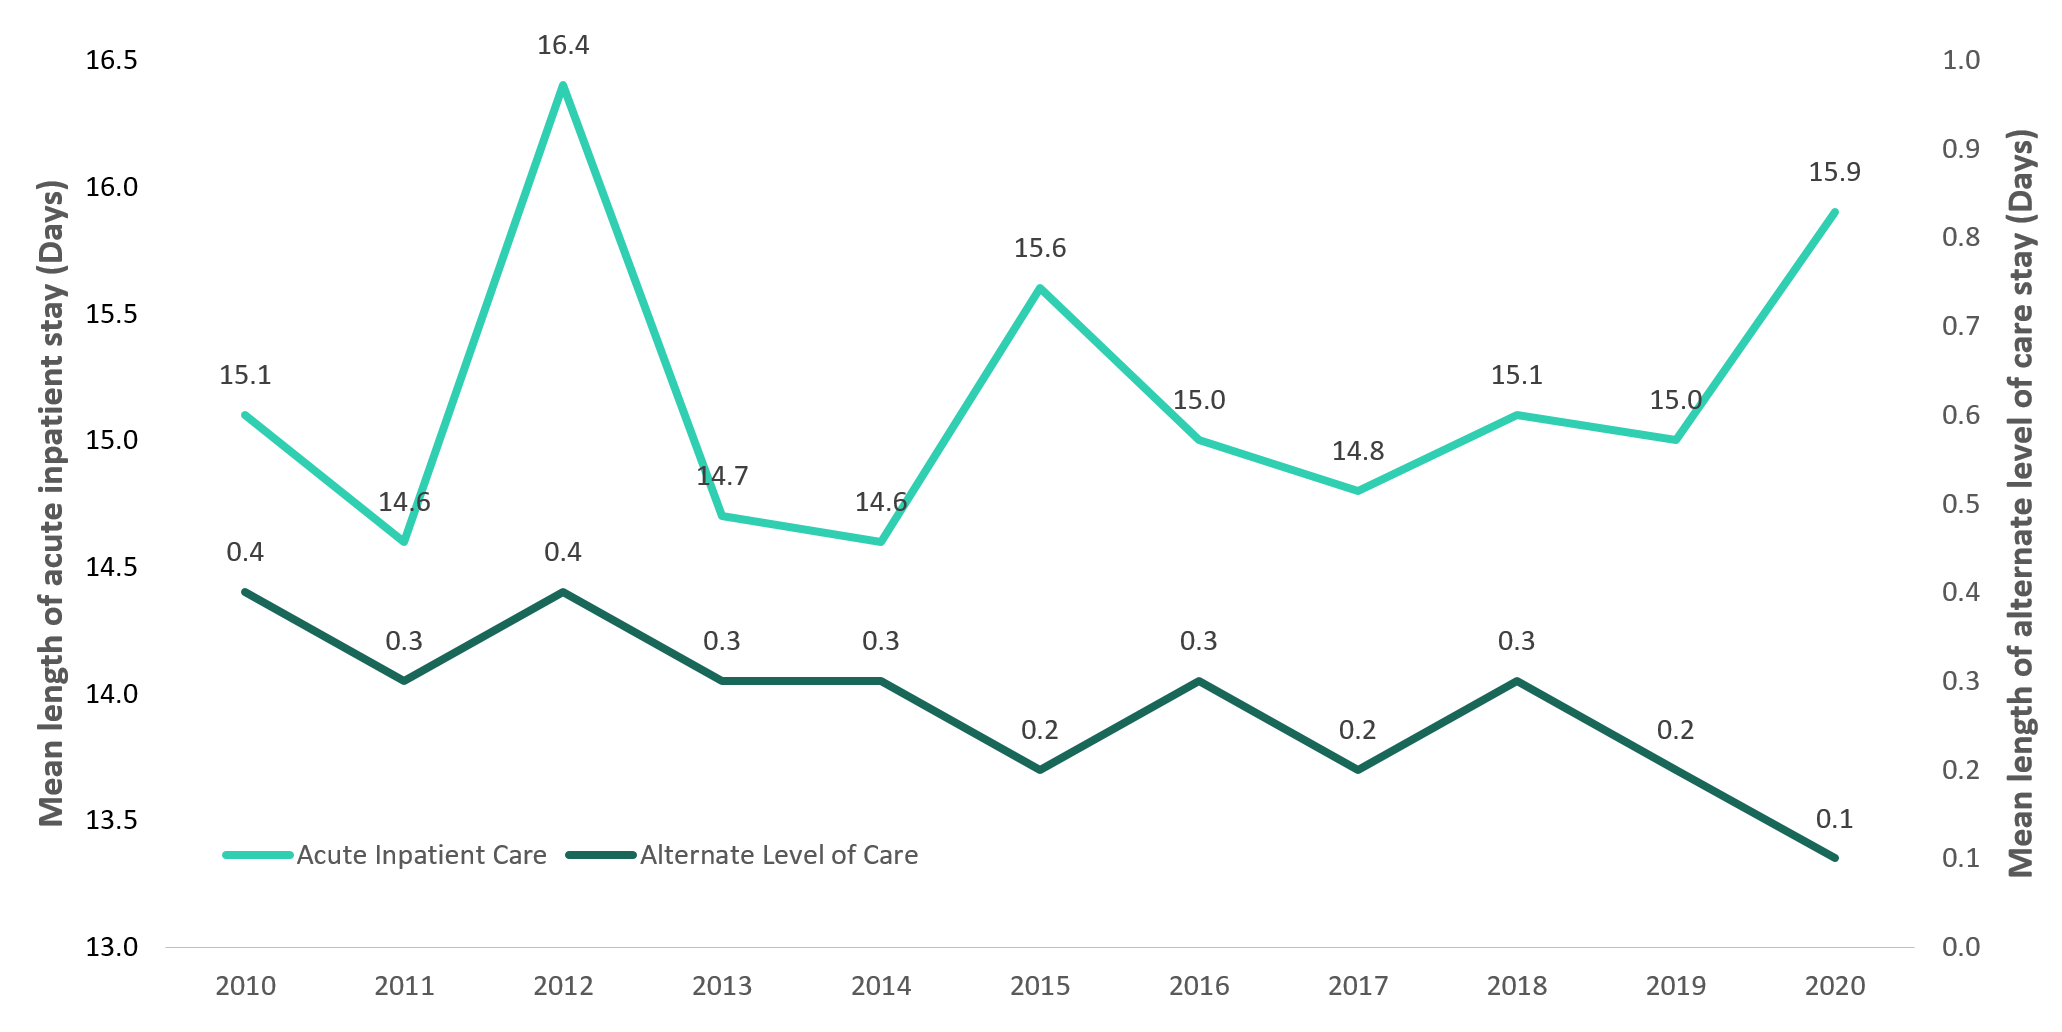 Figure 2: Mean length of stay in hospital for neonatal abstinence syndrome hospitalizations by calendar year, Canada (excluding Québec), 2010-2020